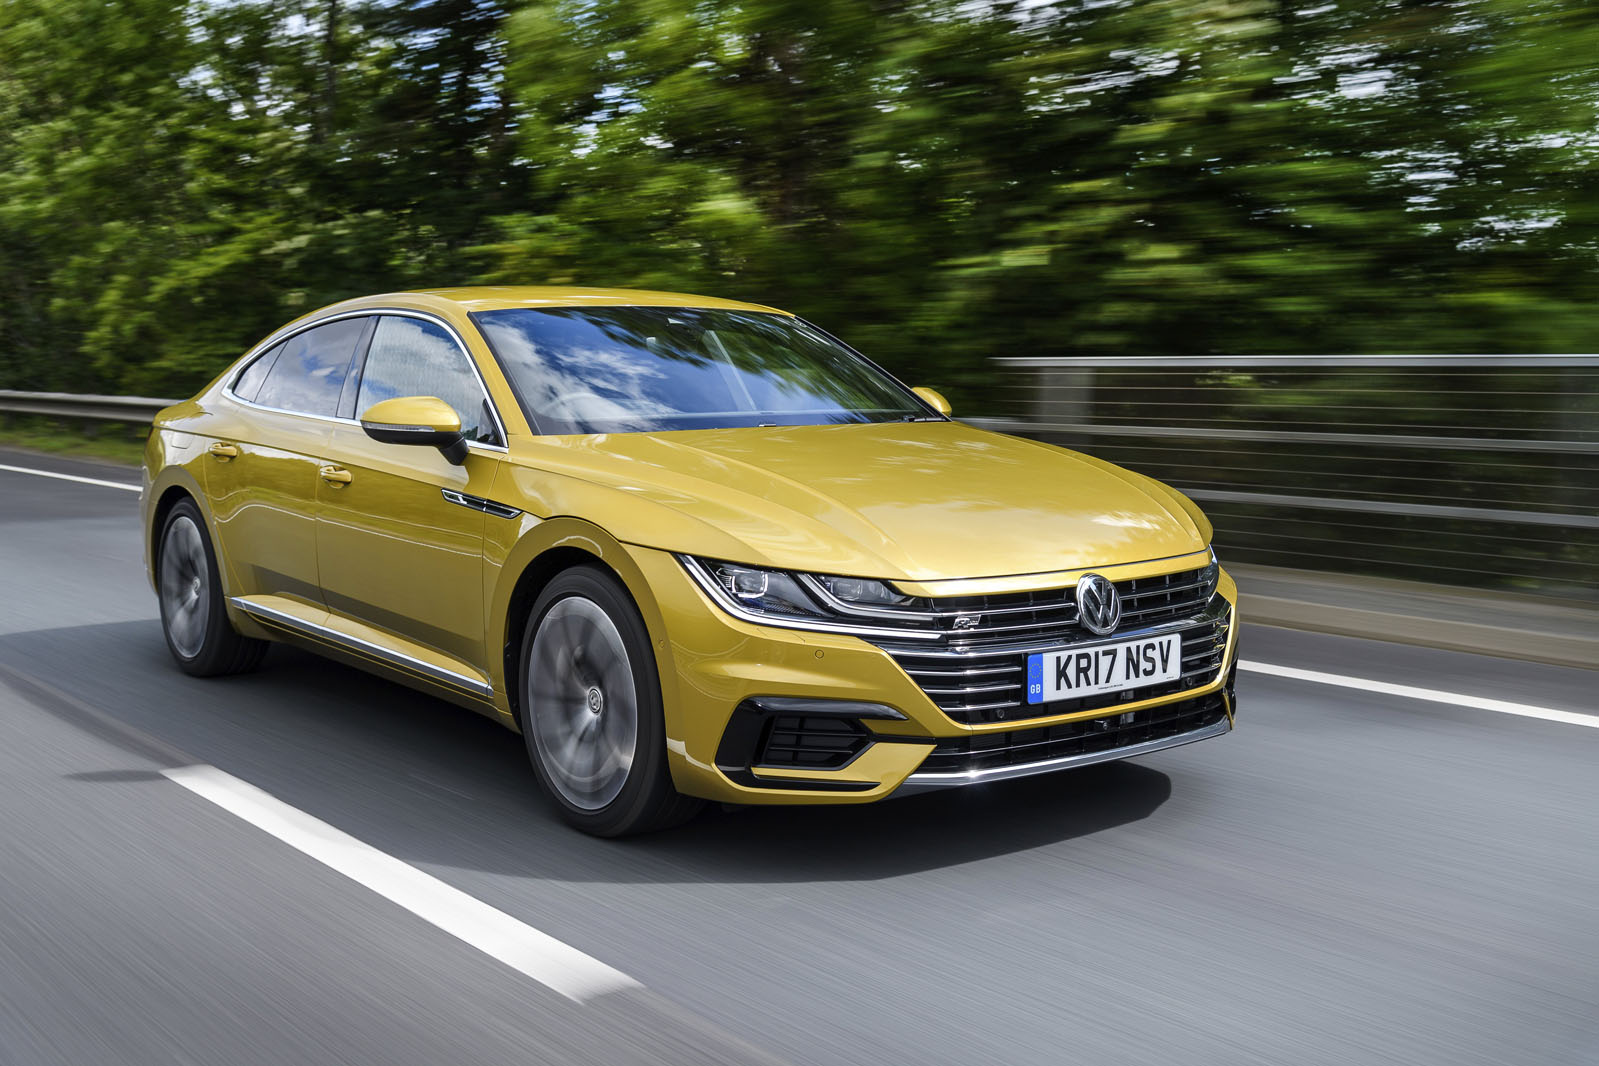 https://www.autocar.co.uk/sites/autocar.co.uk/files/images/car-reviews/first-drives/legacy/99-nearly-new-guide-vw-arteon-front.jpg